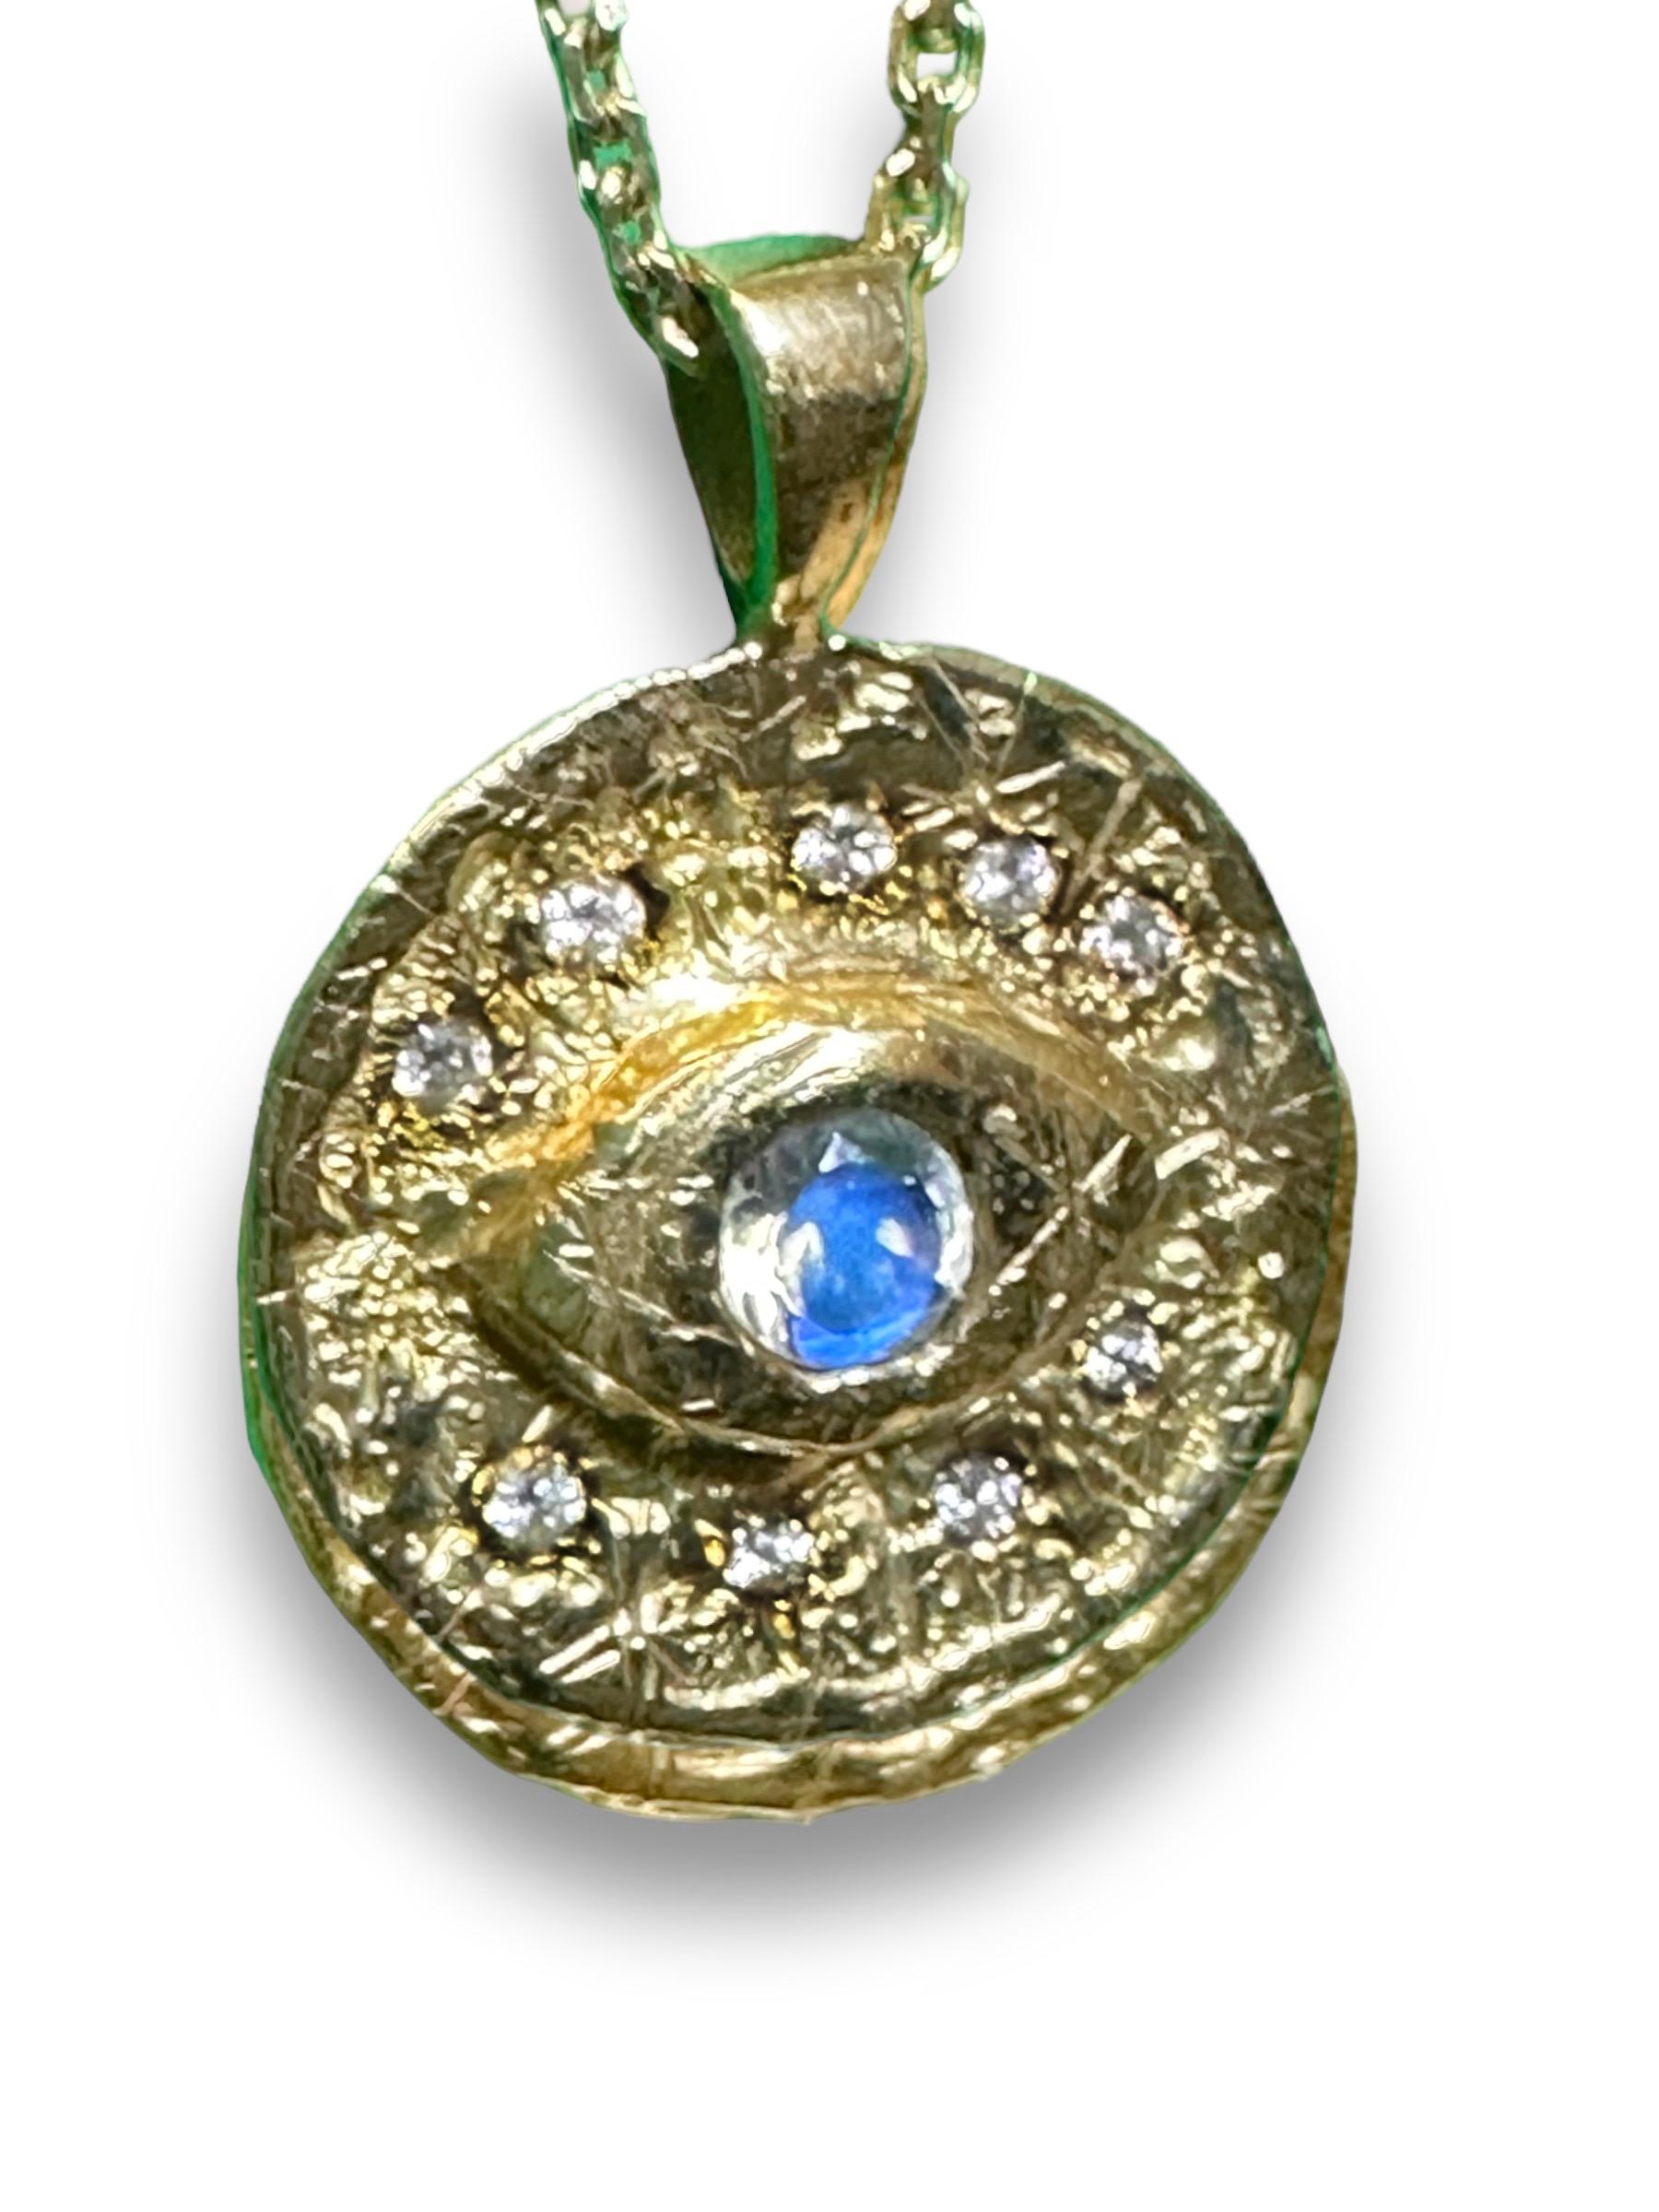 Experience the enchanting allure of history with this one of a kind Eye Coin Talisman Pendant, featuring diamonds and a moonstone set in 18K Yellow Gold. Handcrafted and inspired by the captivating beauty of ancient jewellery, the pendant is a